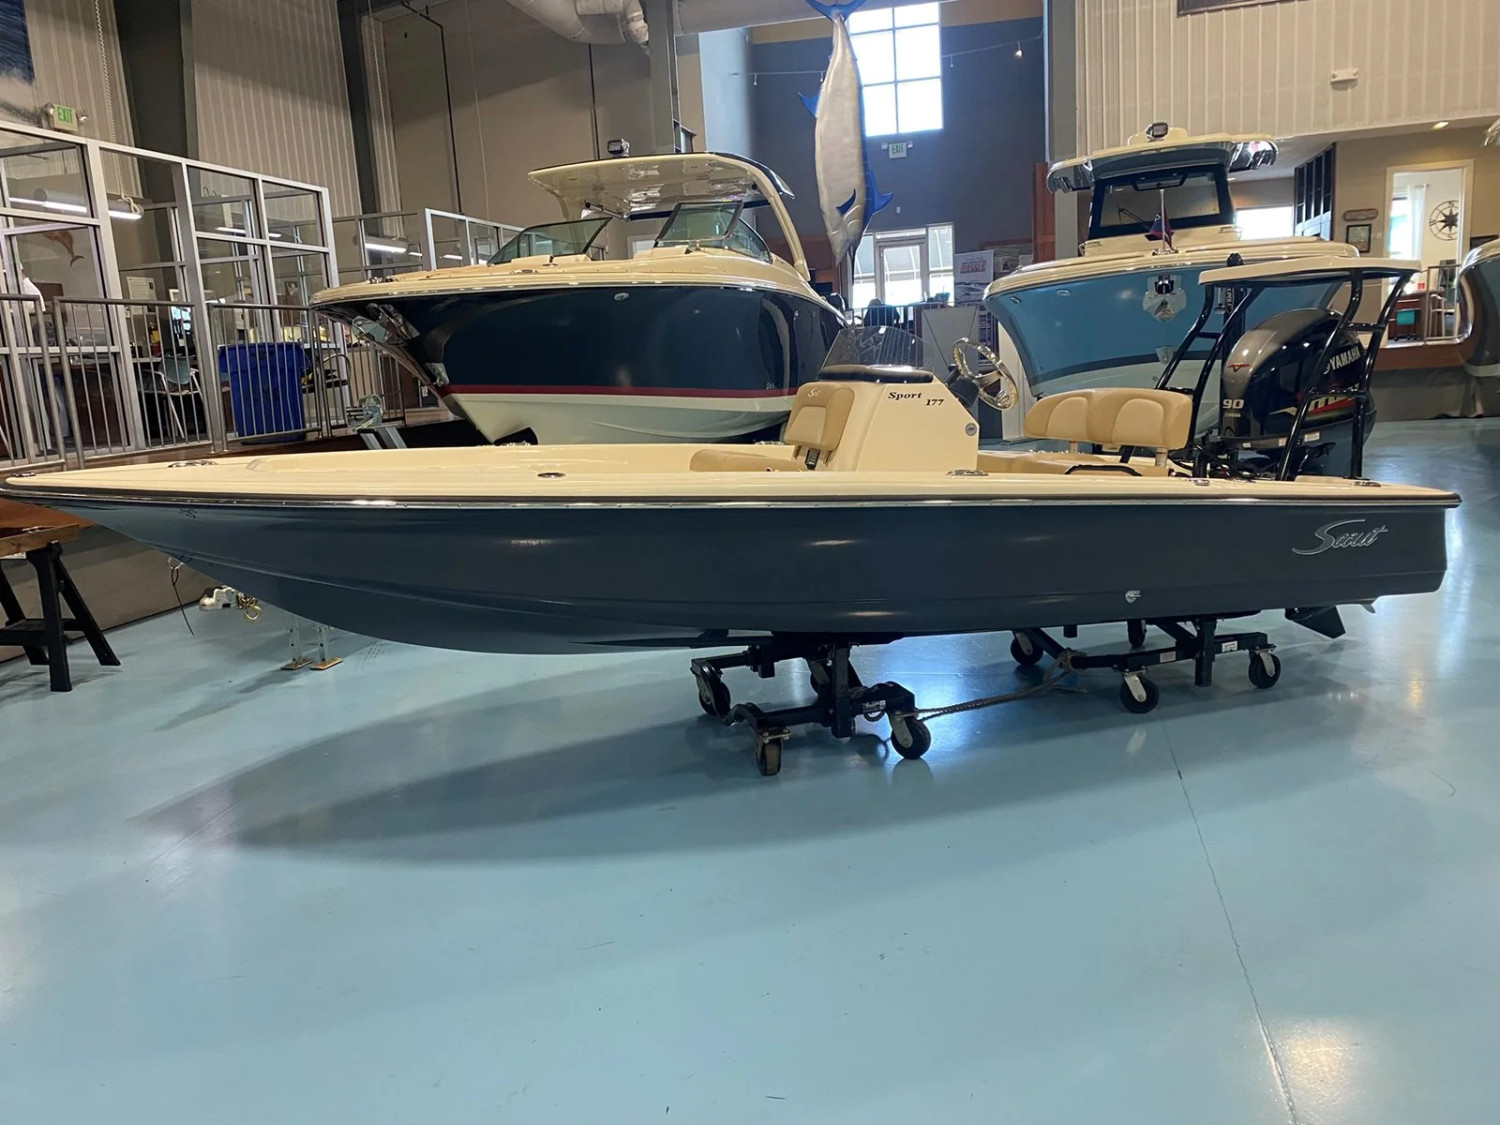 Page 4 of 231 - Used sport fishing boats for sale 